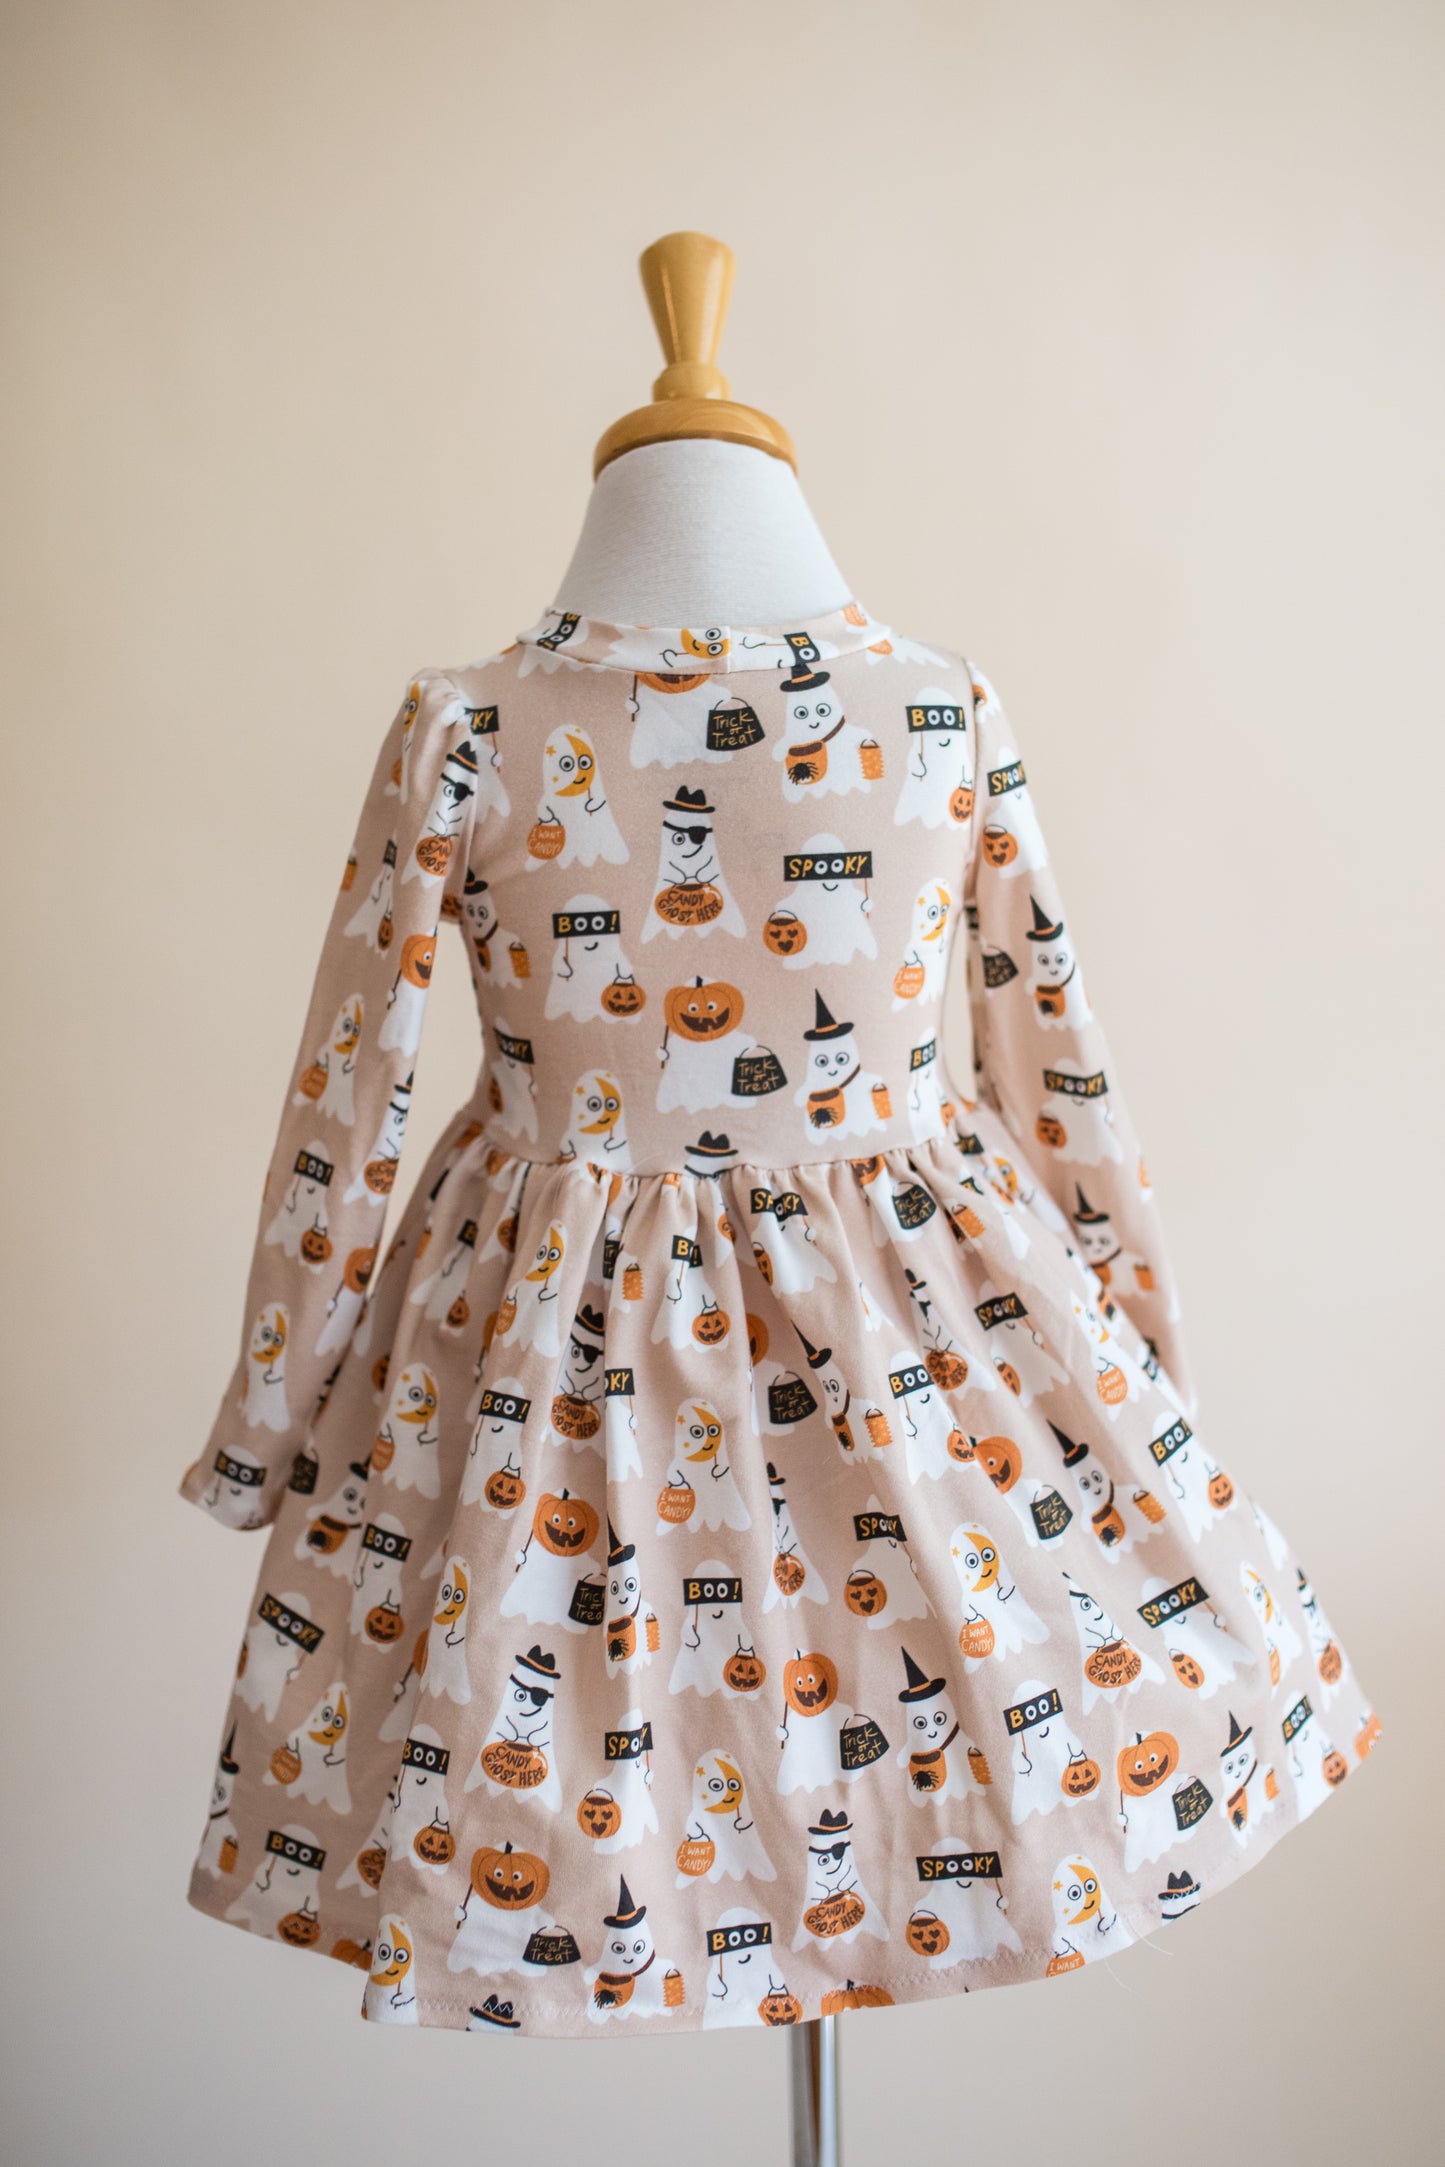 Trick or Treating Ghosts Dress